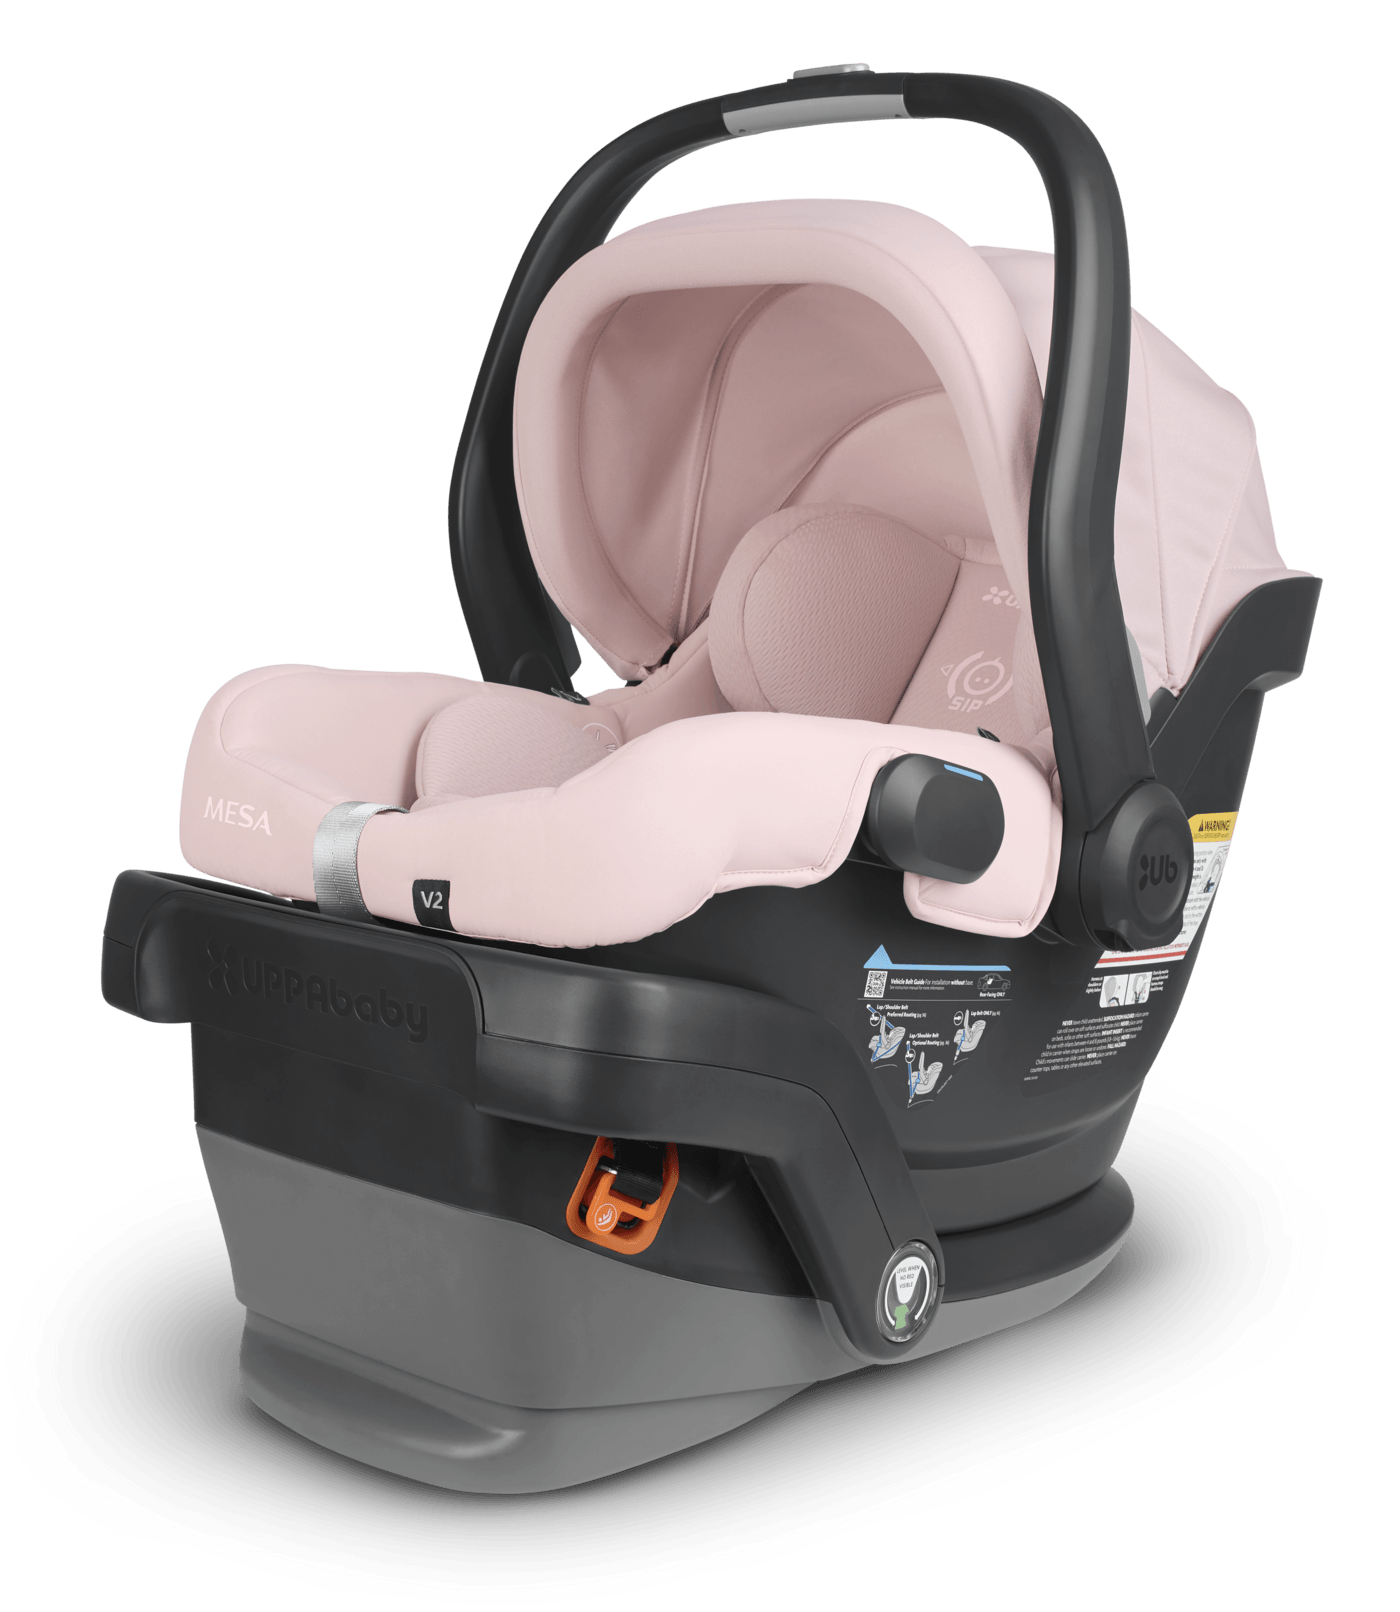 UPPAbaby MESA V2 Infant Car Seat - Alice (Dusty Pink) - Traveling Tikes 